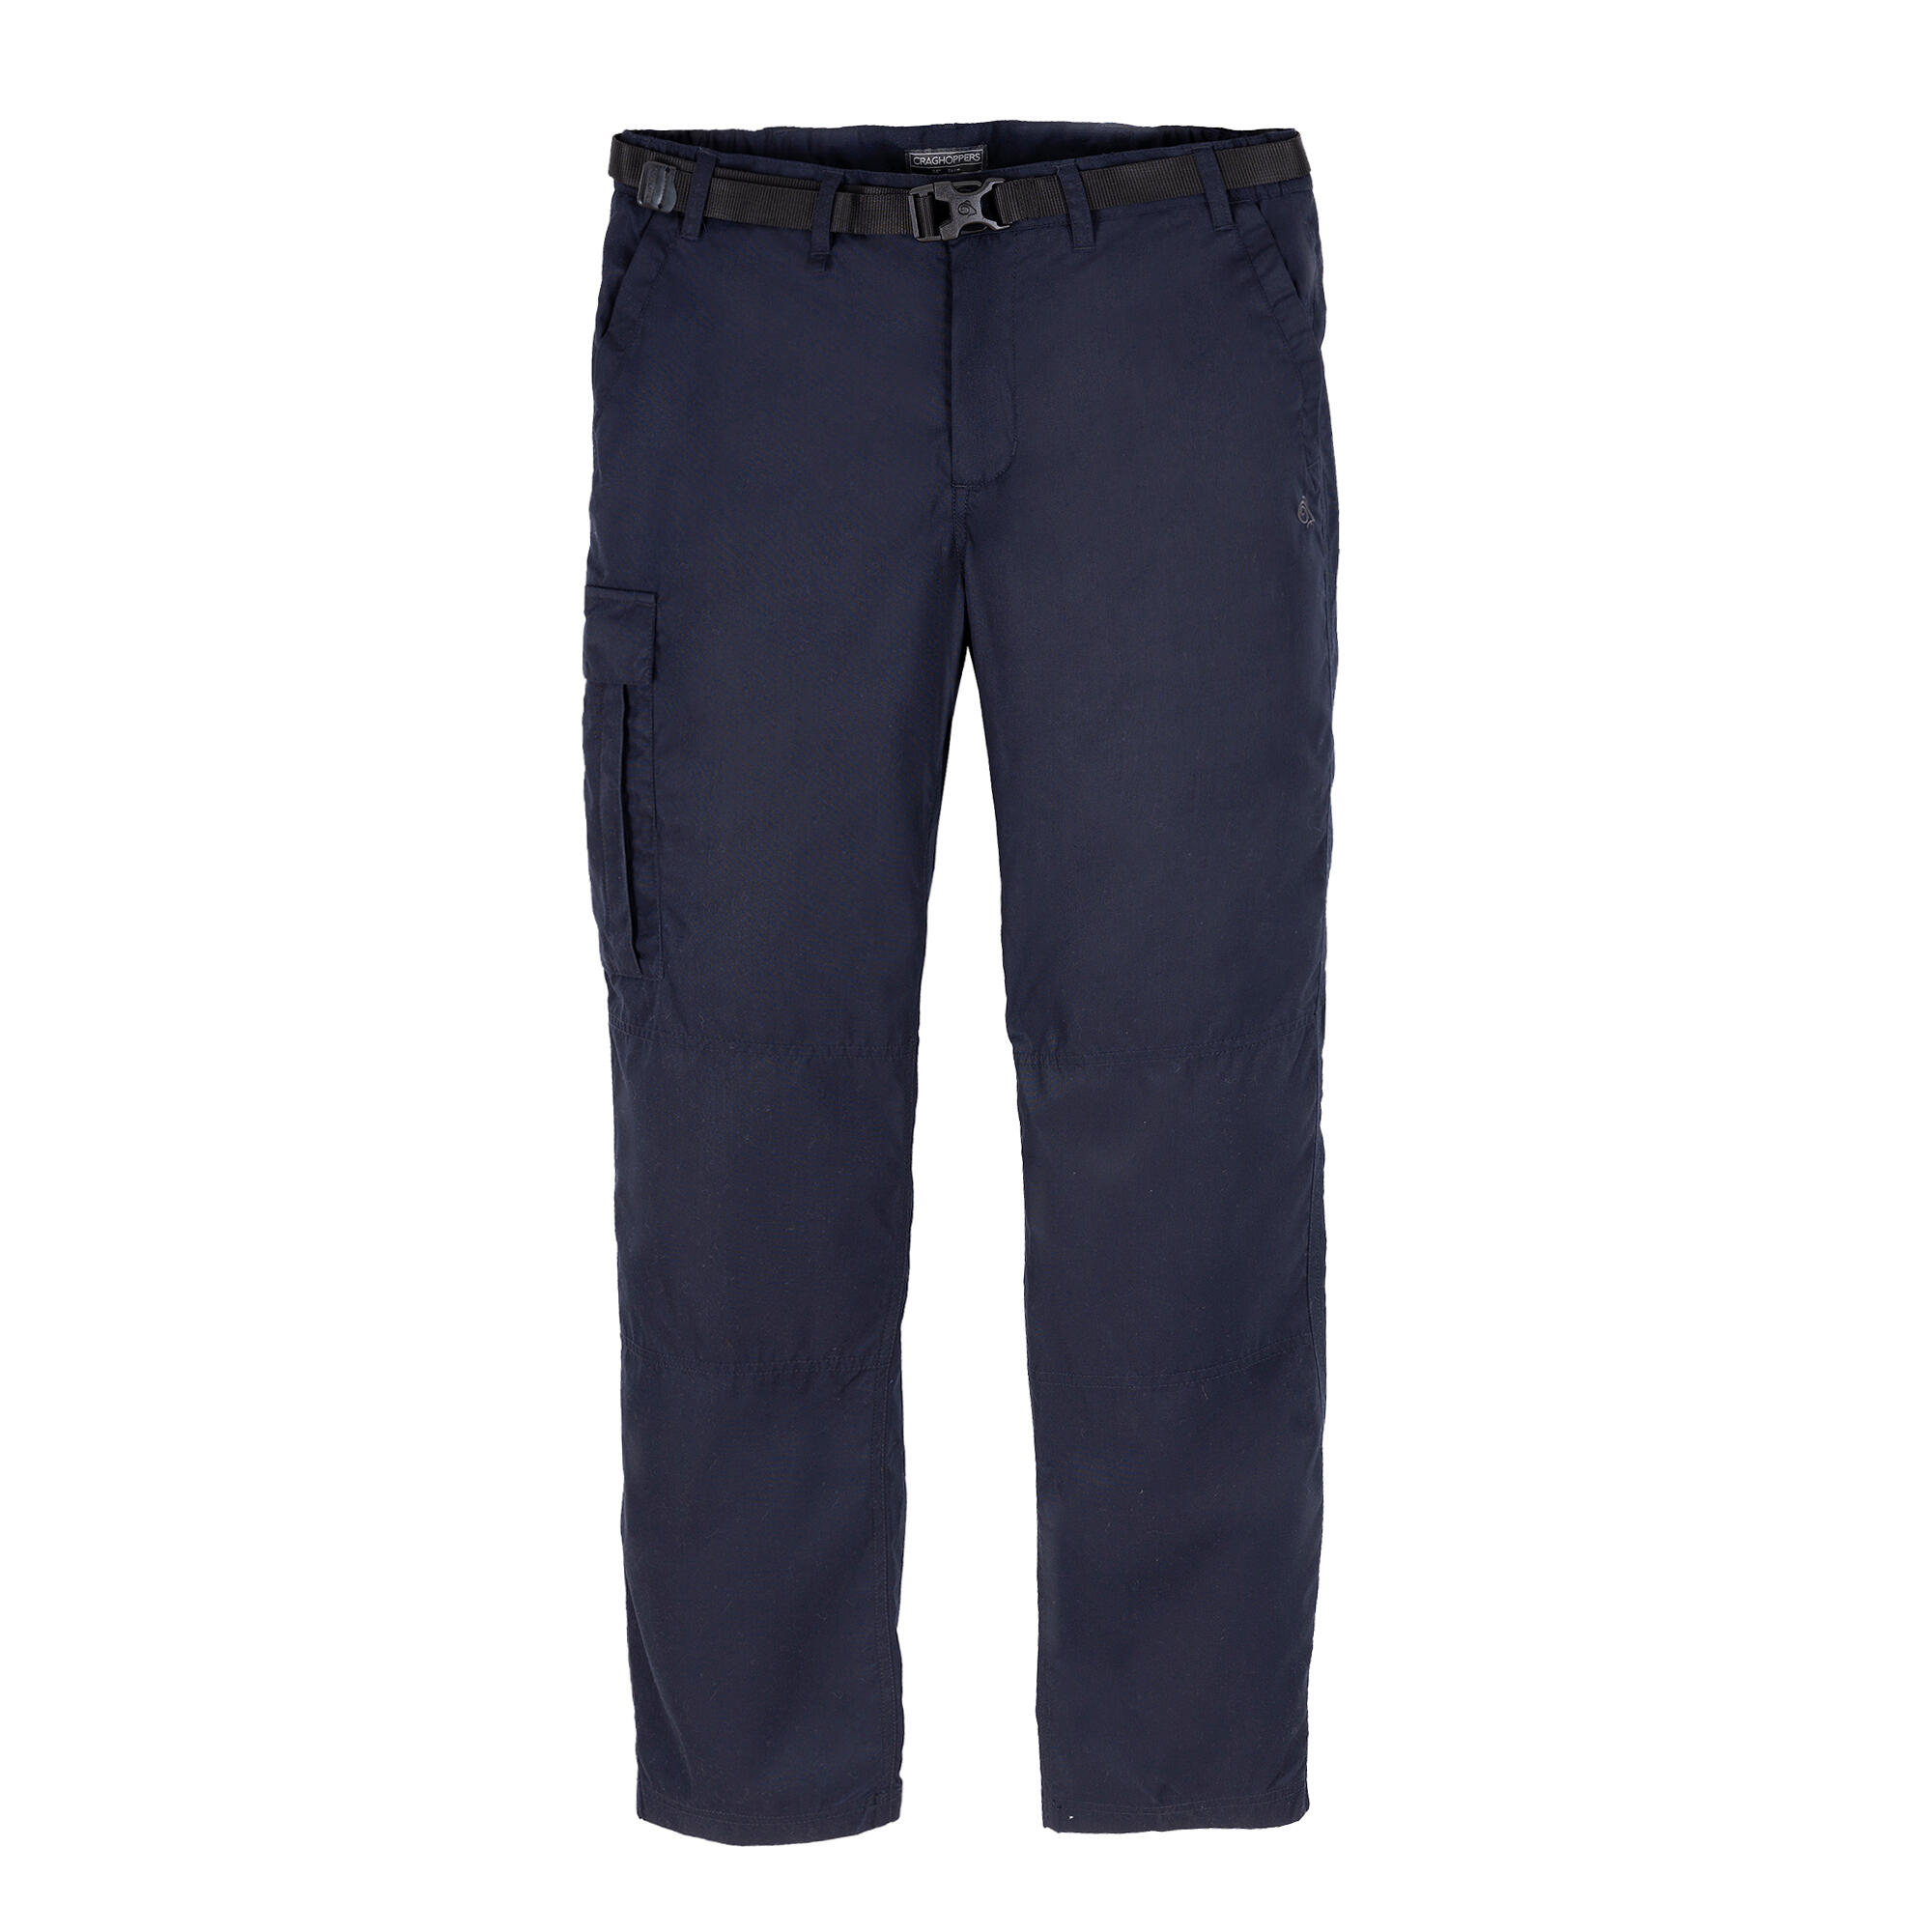 CRAGHOPPERS Men's Expert Kiwi Tailored Trousers